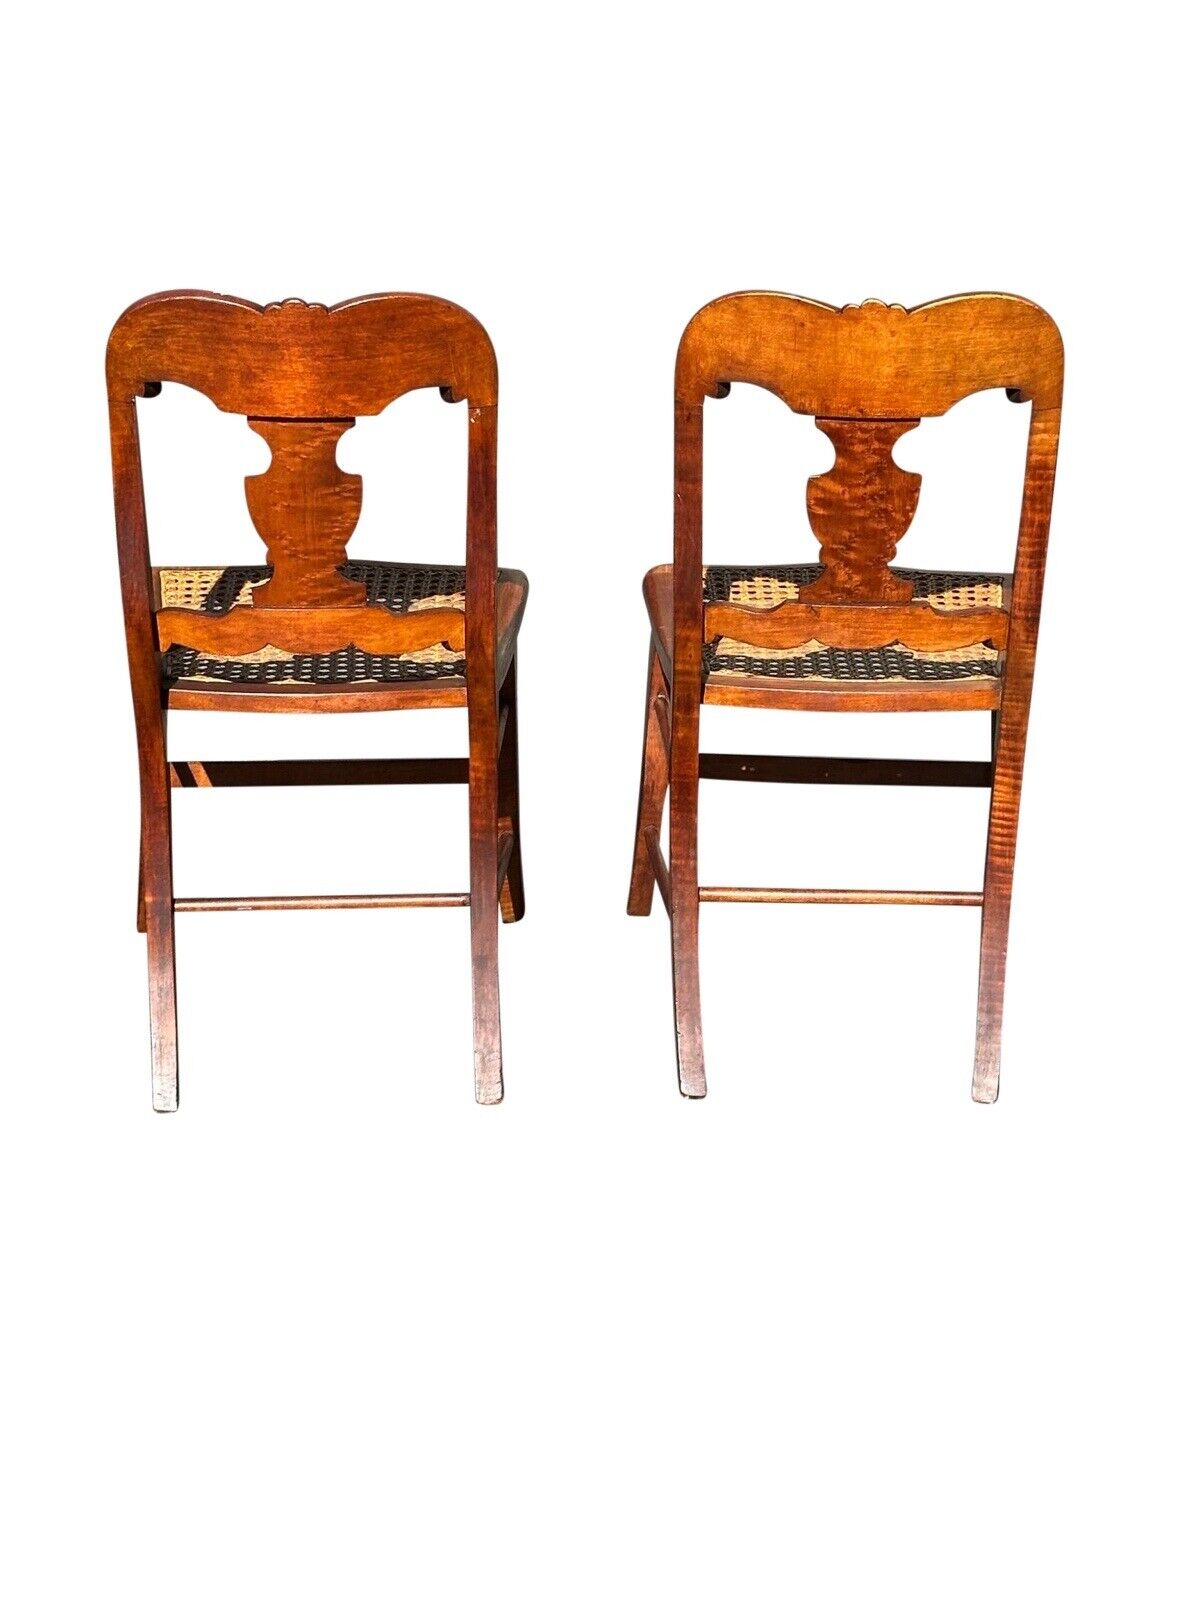 Set of Six Antique Federal Period Bird's Eye & Tiger Maple Country Dining Chairs